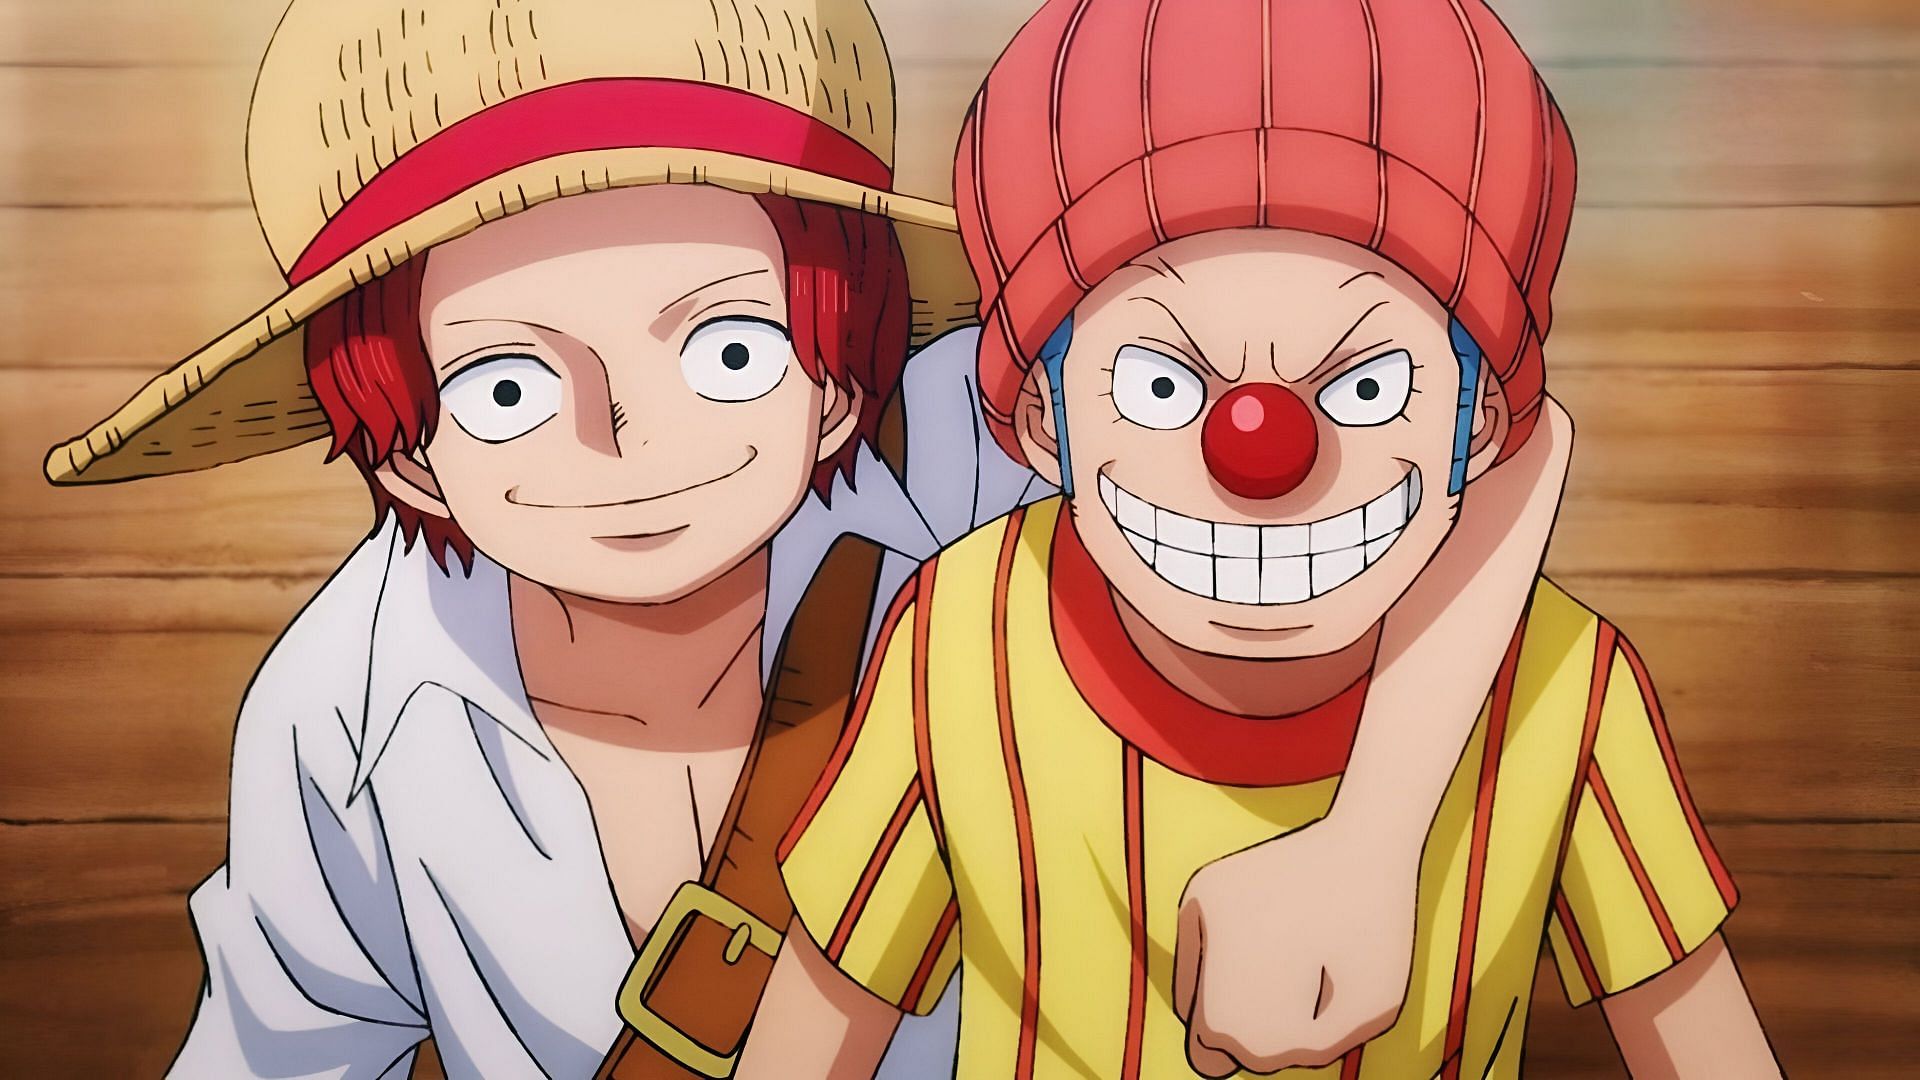 Shanks (left) and Buggy (right) as seen in the anime (Image via Toei Animation)